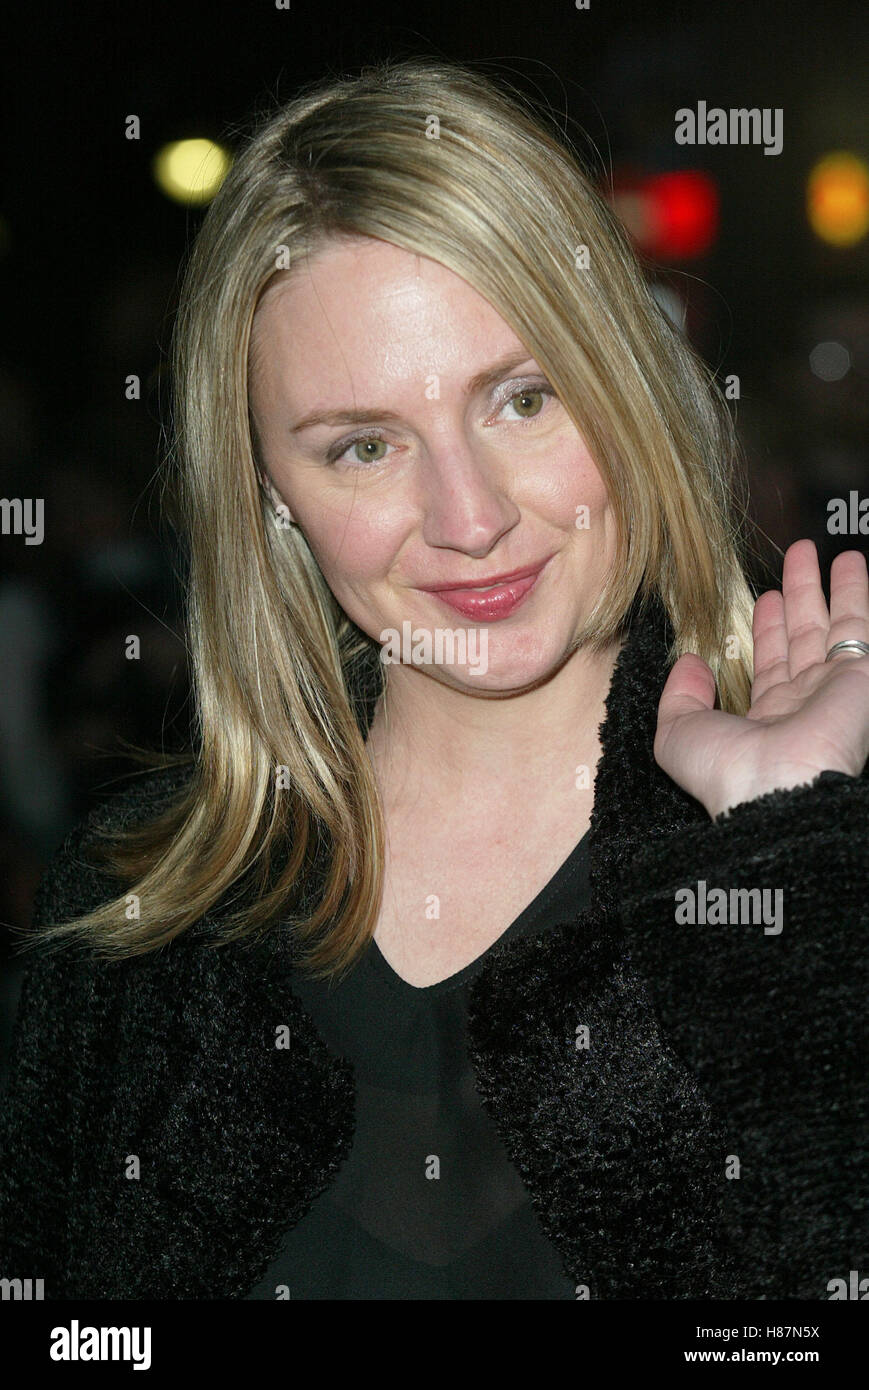 HOPE DAVIS CANNES FILM FESTIVAL CANNES FRANCE 17 May 2003 Stock Photo ...